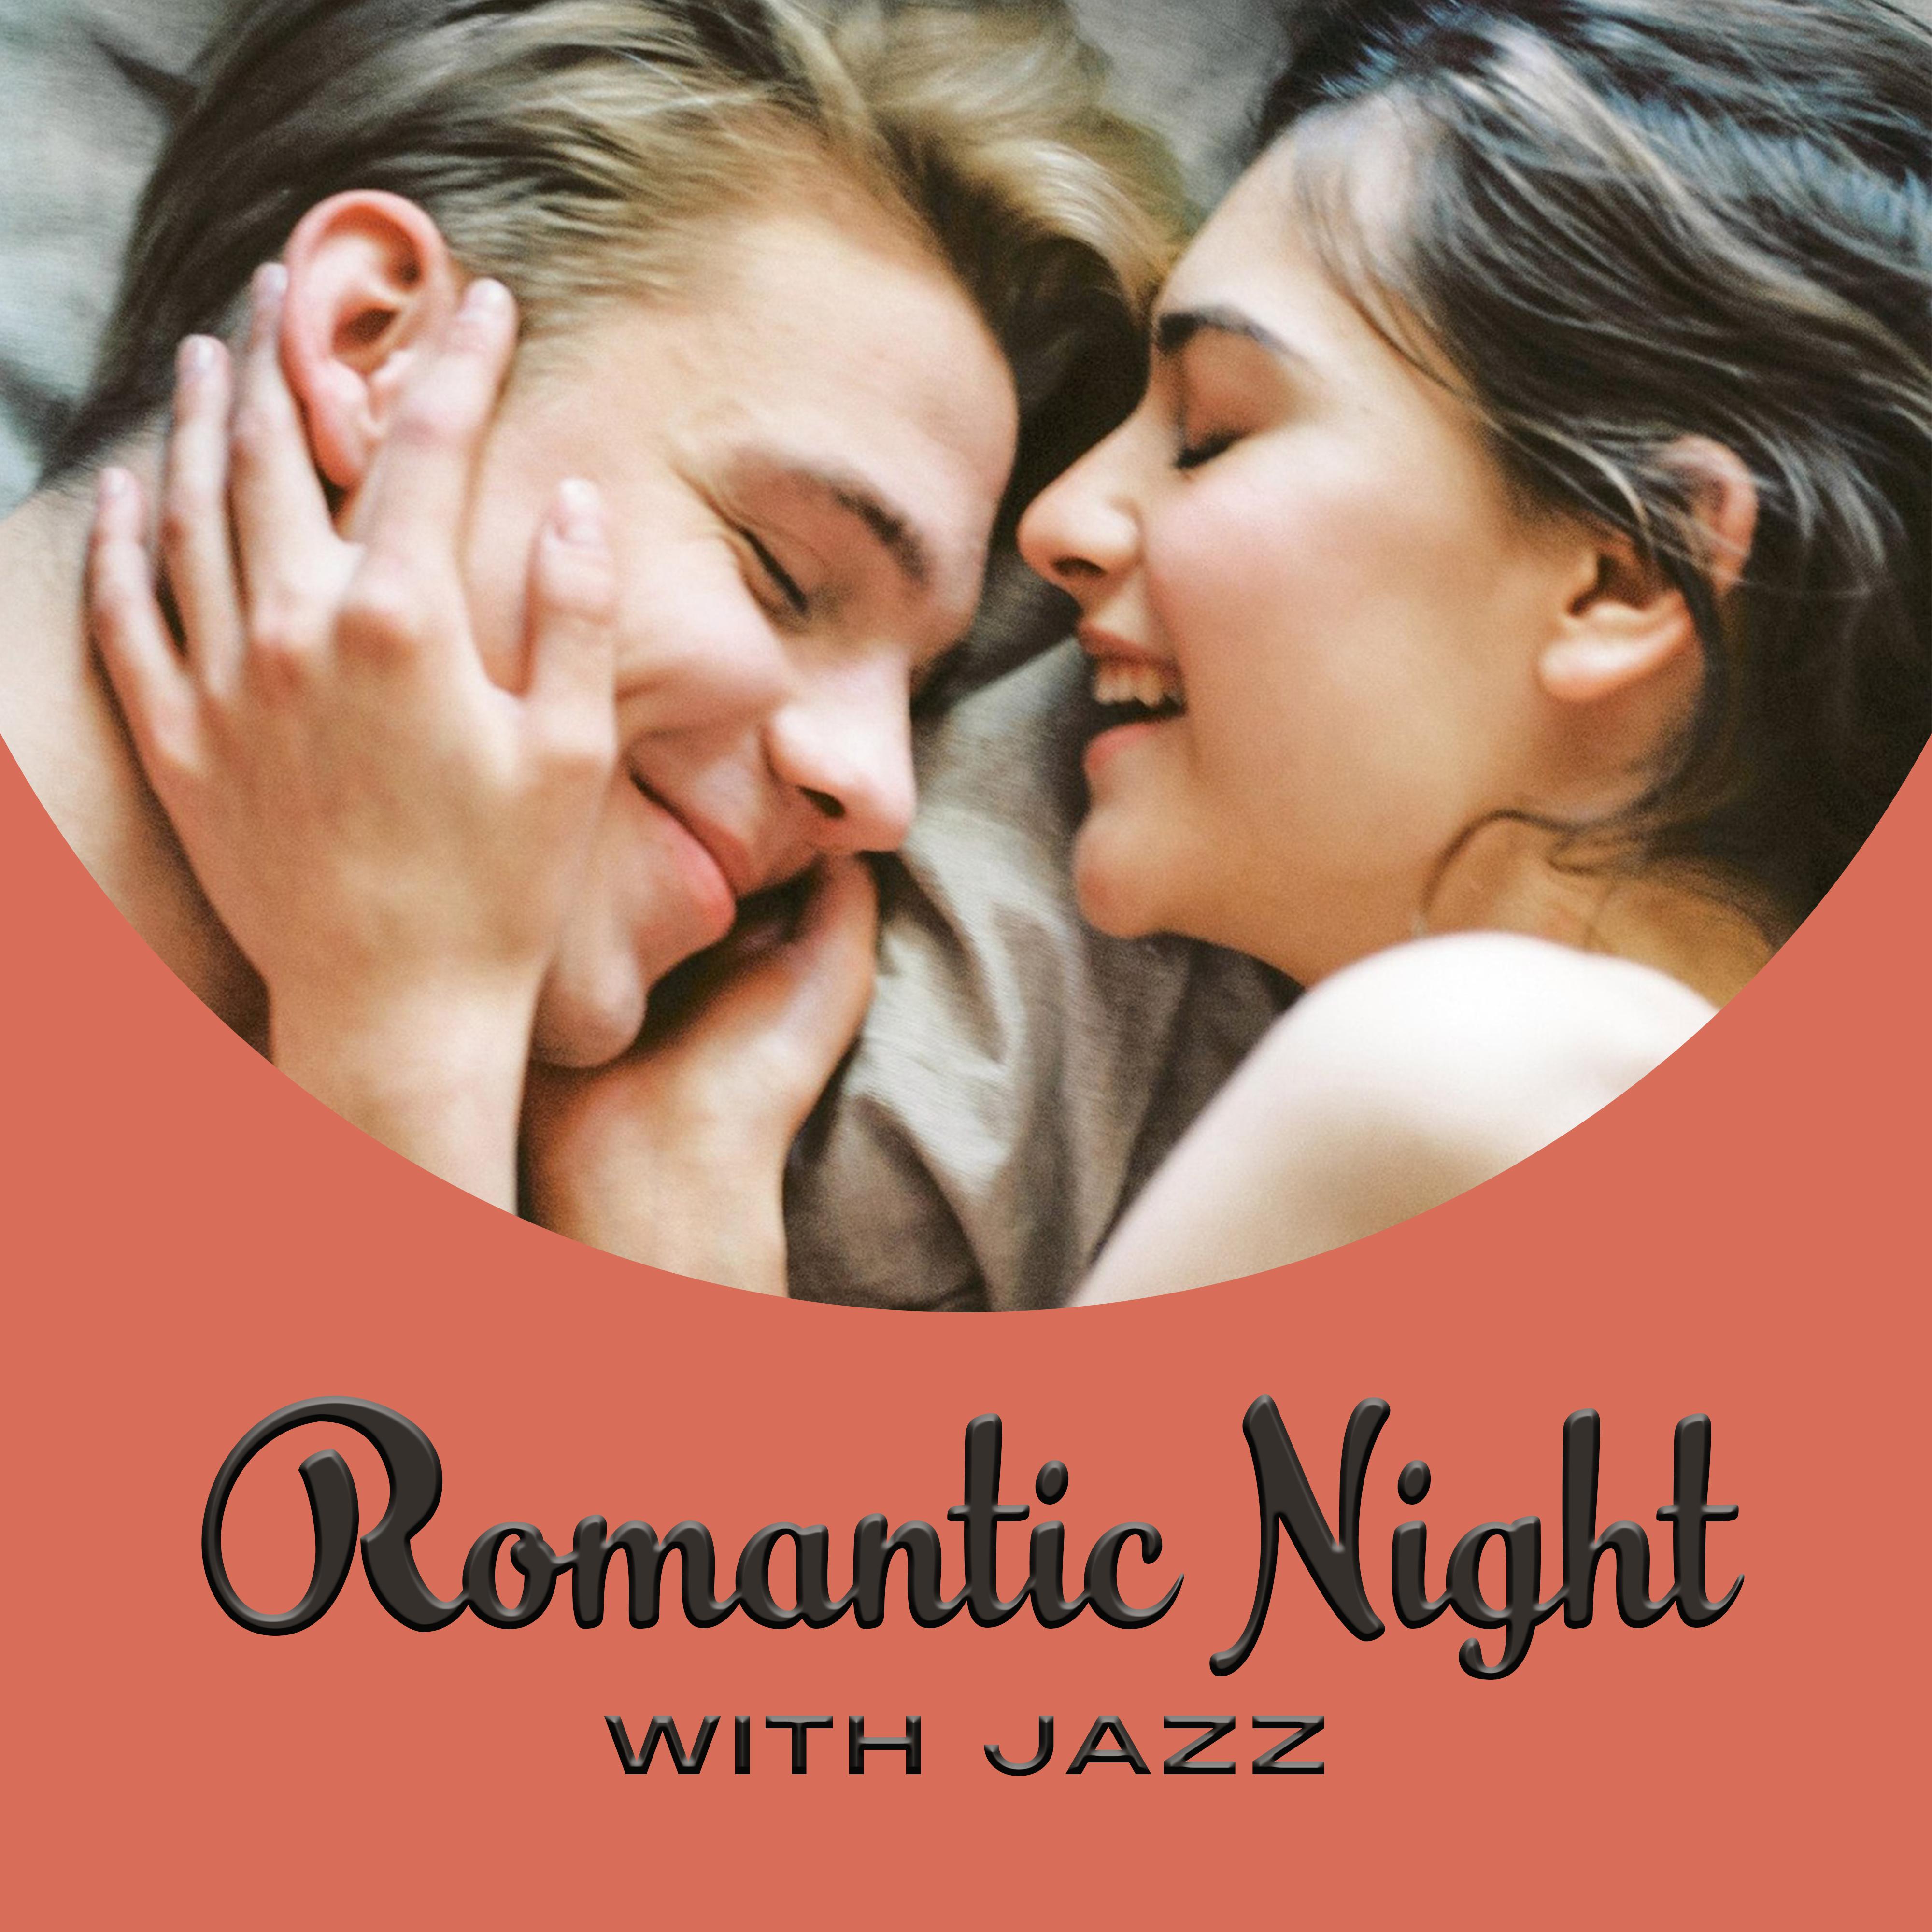 Romantic Night with Jazz  Sensual Jazz Music, Relax for Two, Romantic Evening, Pure Rest, Chilled Jazz, Making Love